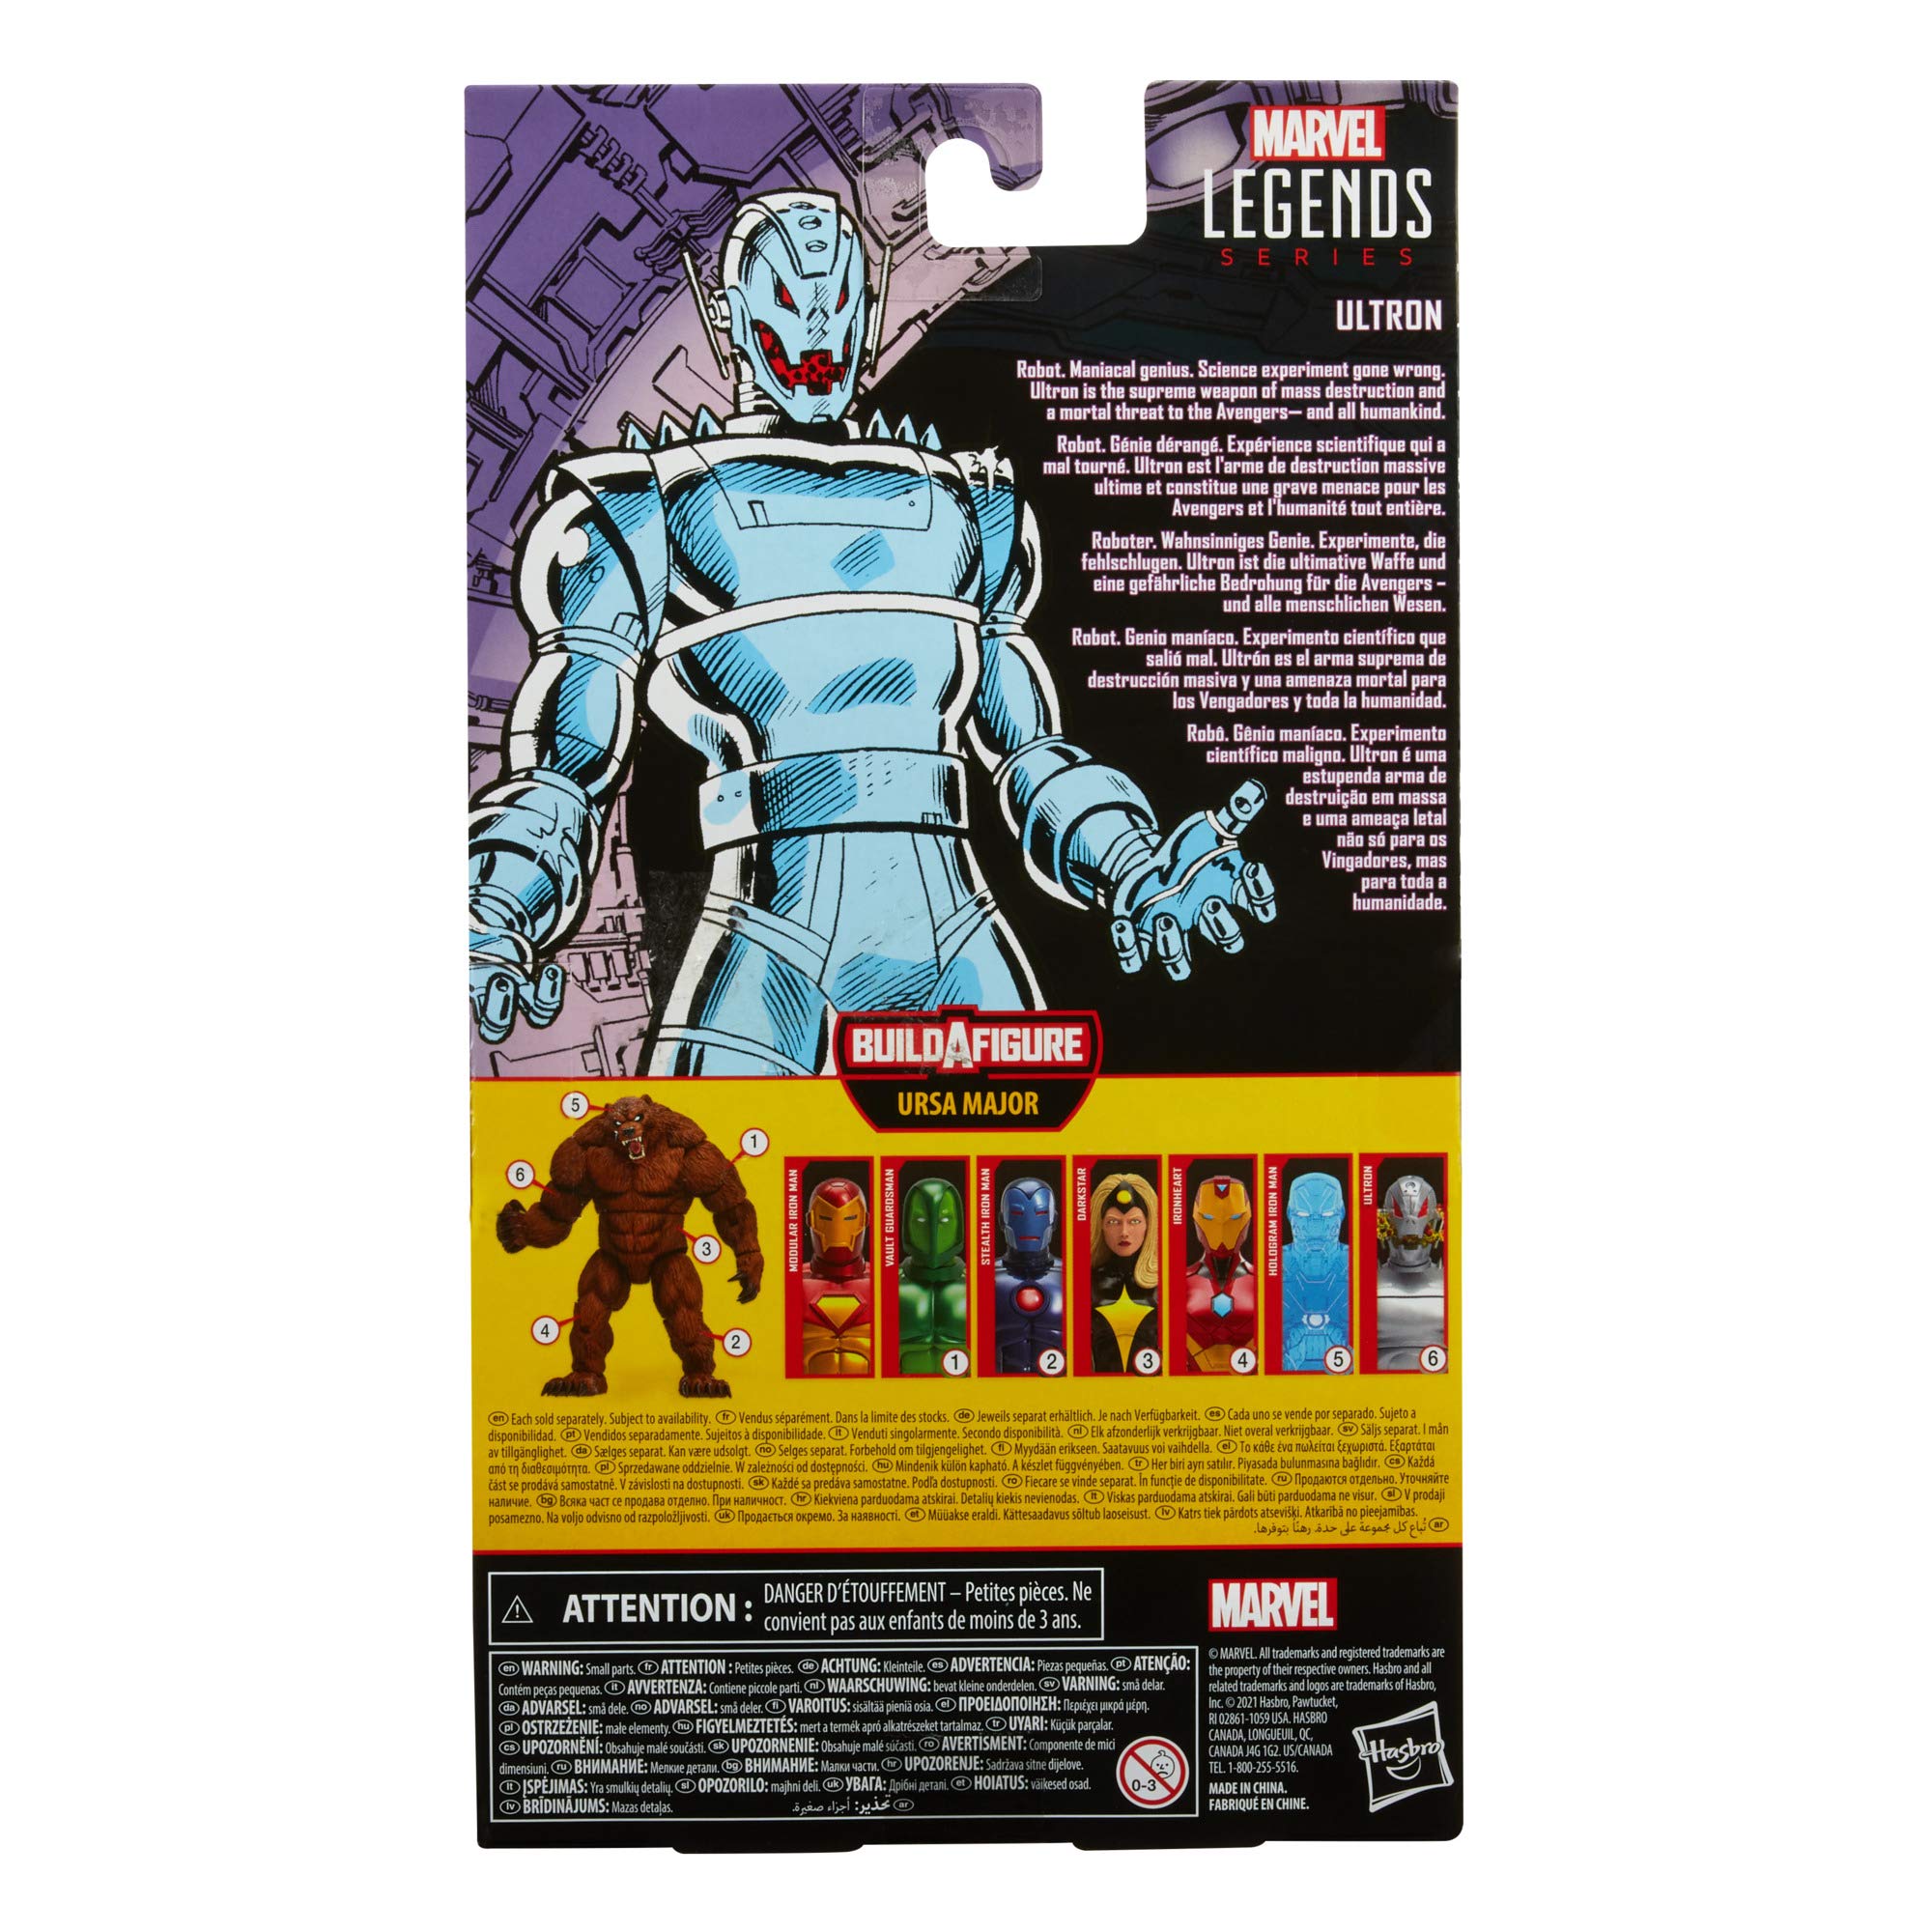 Marvel Hasbro Legends Series 6-inch Ultron Action Figure Toy, Premium Design and Articulation, Includes 5 Accessories and Build-A-Figure Part